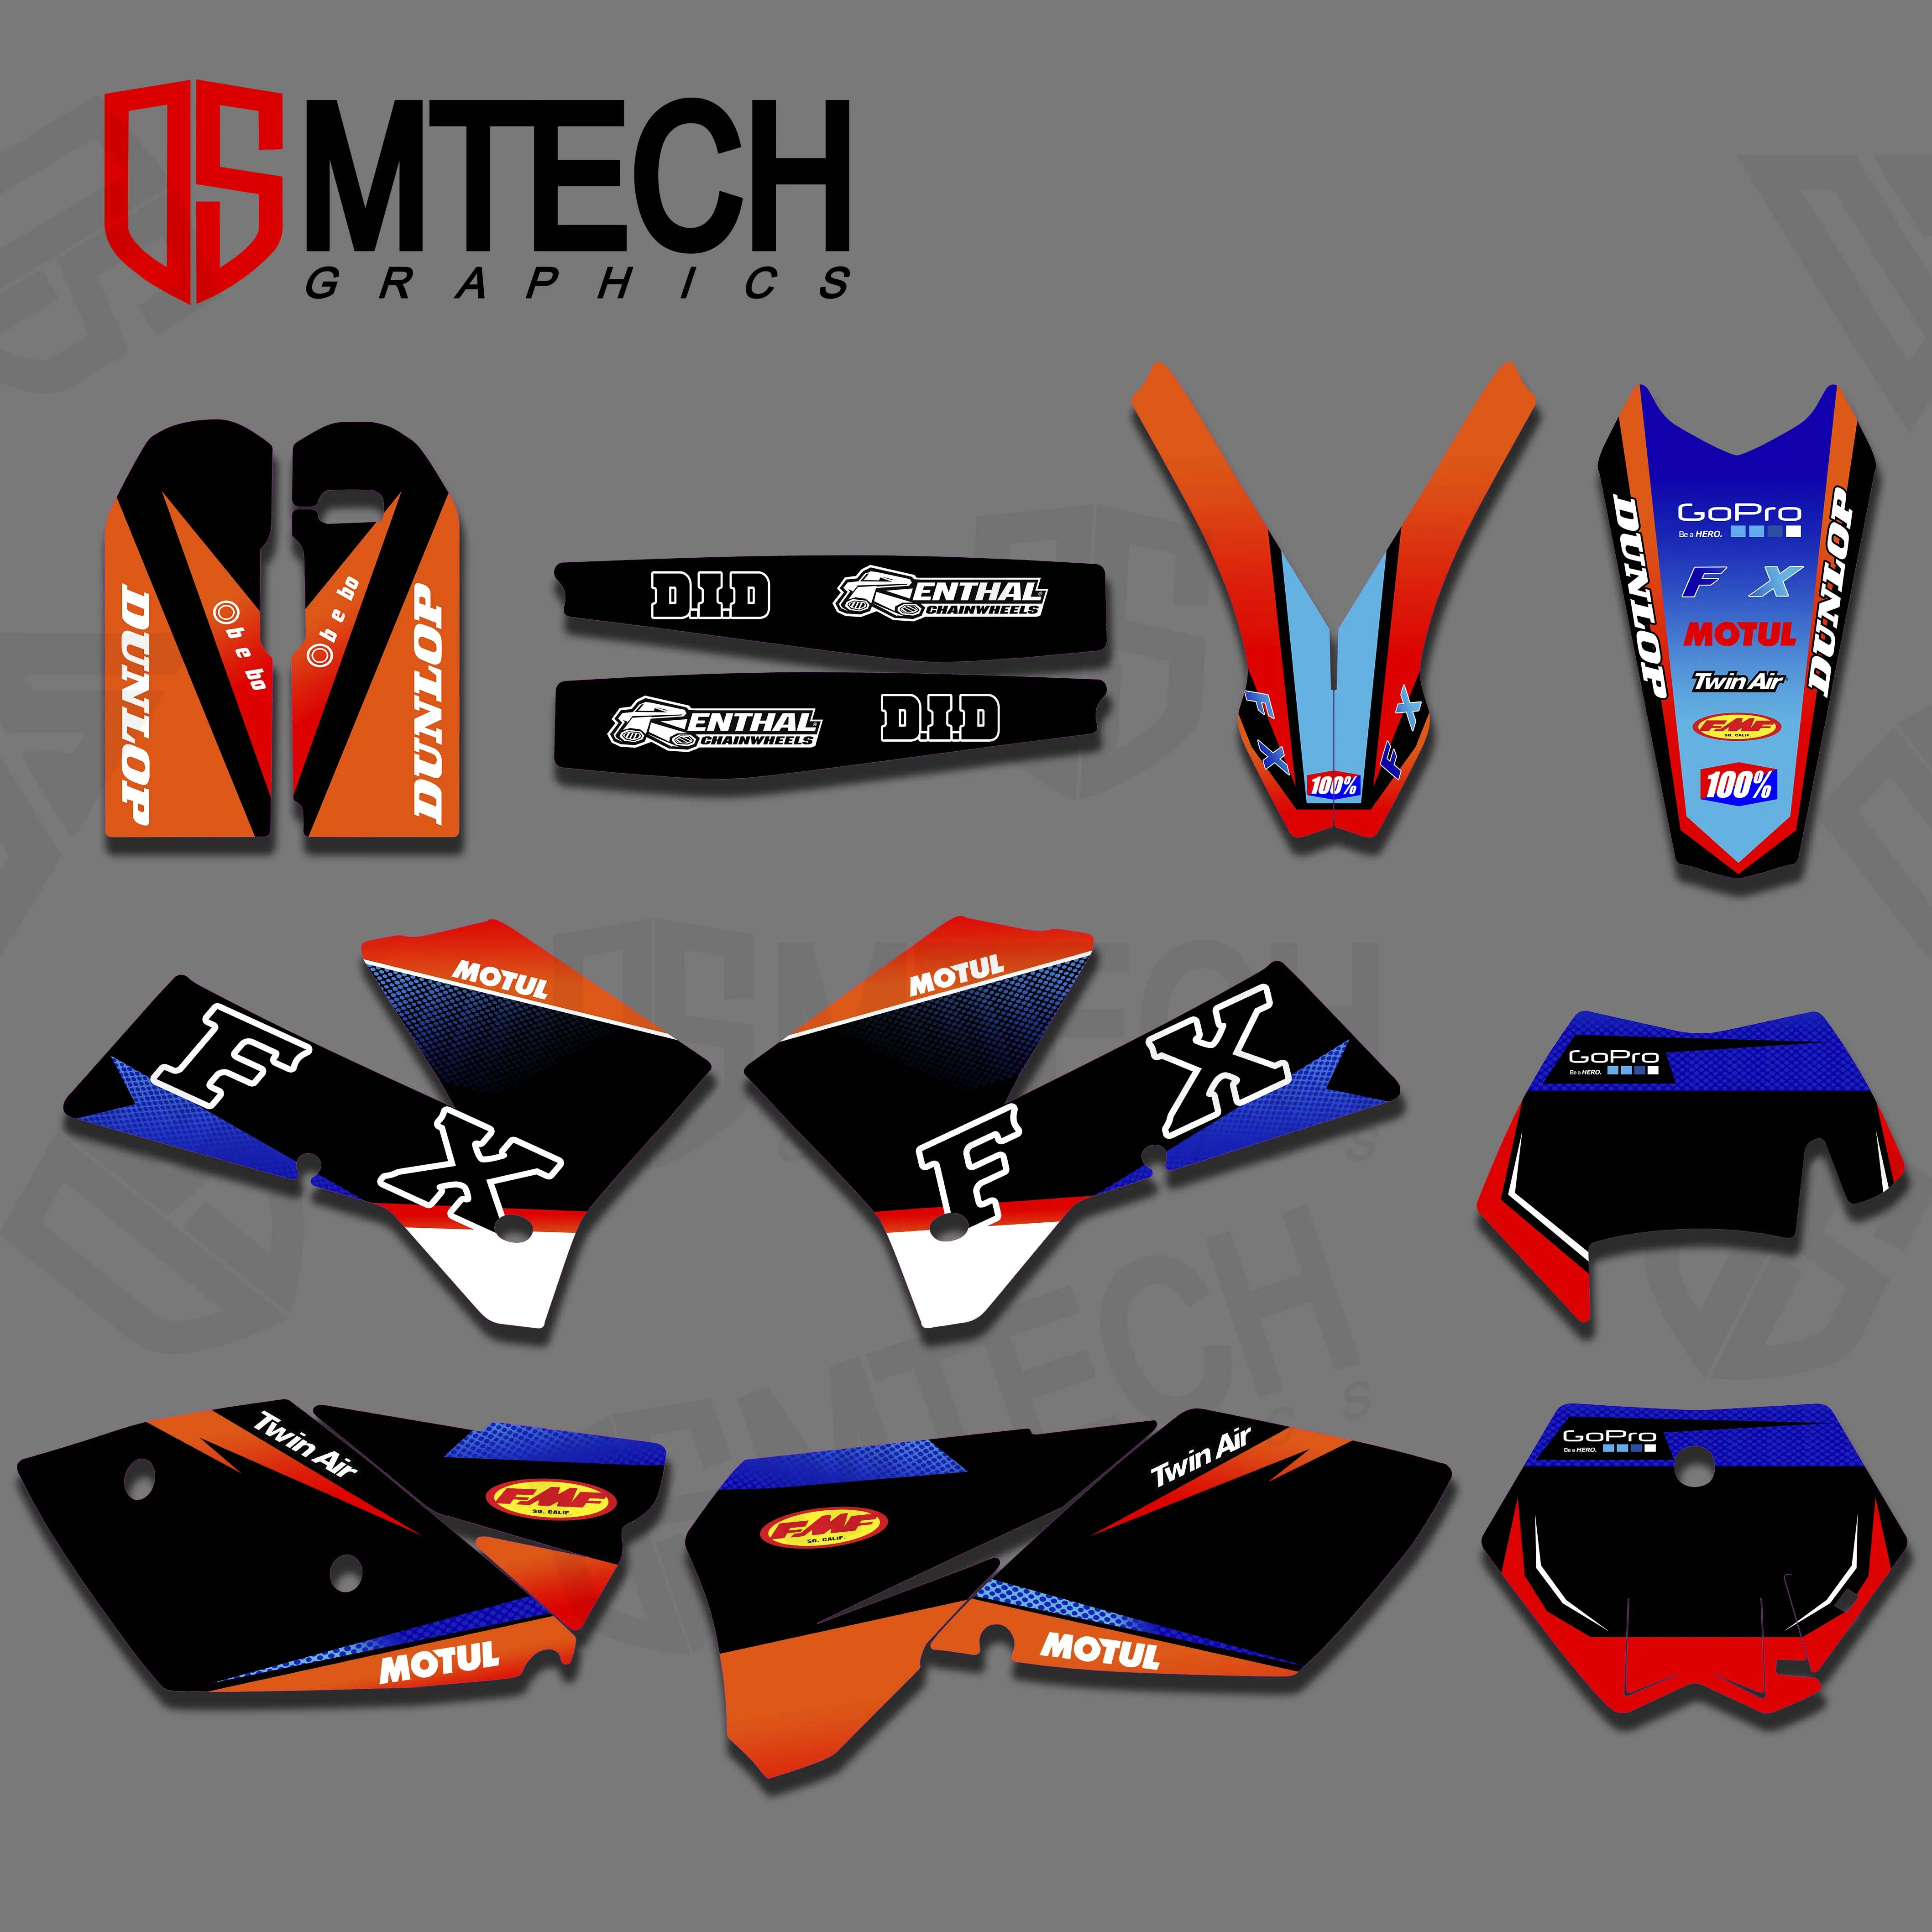 DSMTECH New team graphics decal sticker for ktm 125 200 250 300 400 450 525 sx sxf mxc xc xcf xcw exc excr 2005 2006 2007